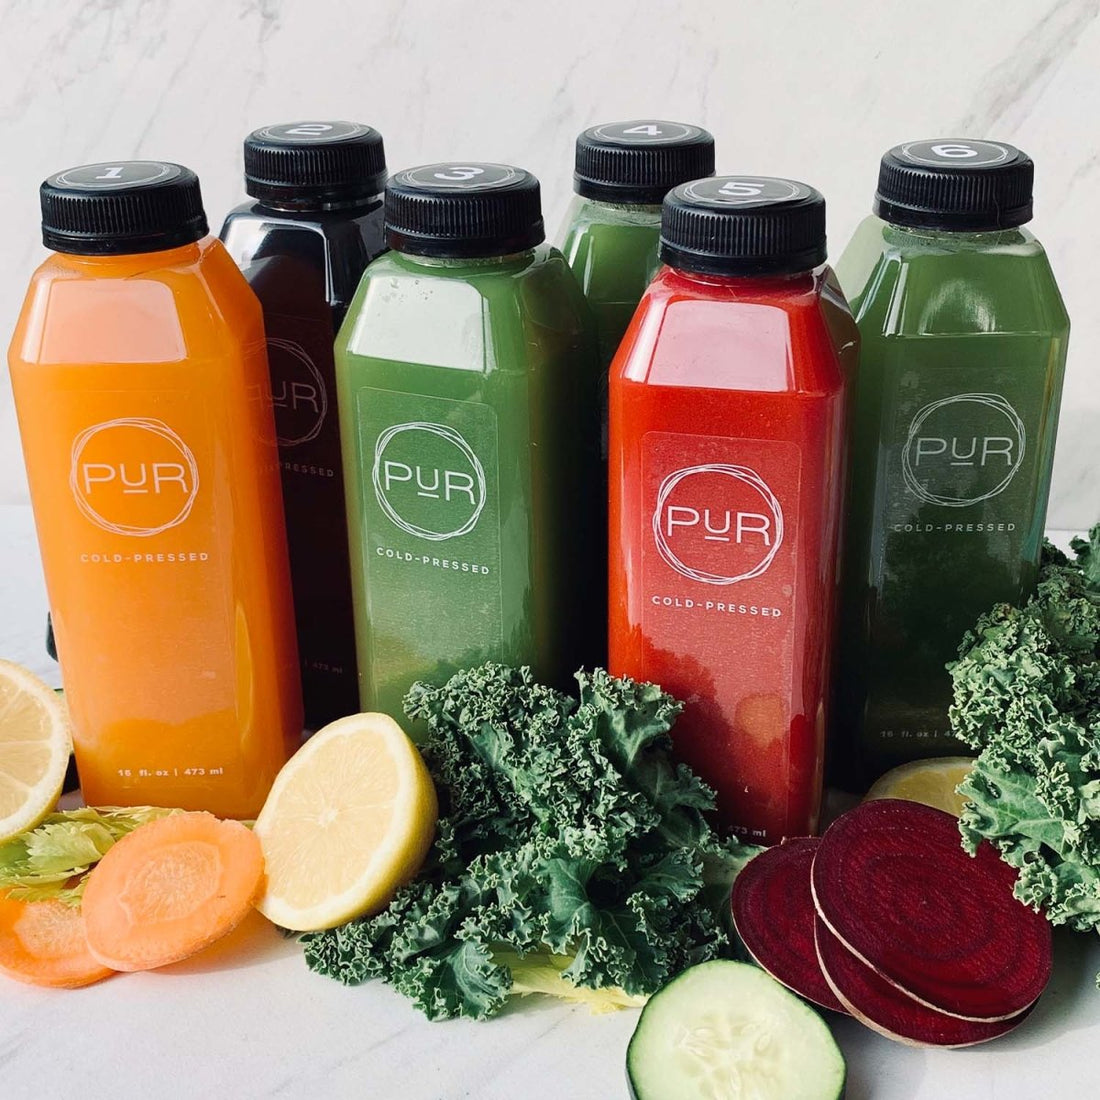 PUR Subscription Program: Best Juice Cleanse Delivery To Your Home - PUR Cold Pressed Juice